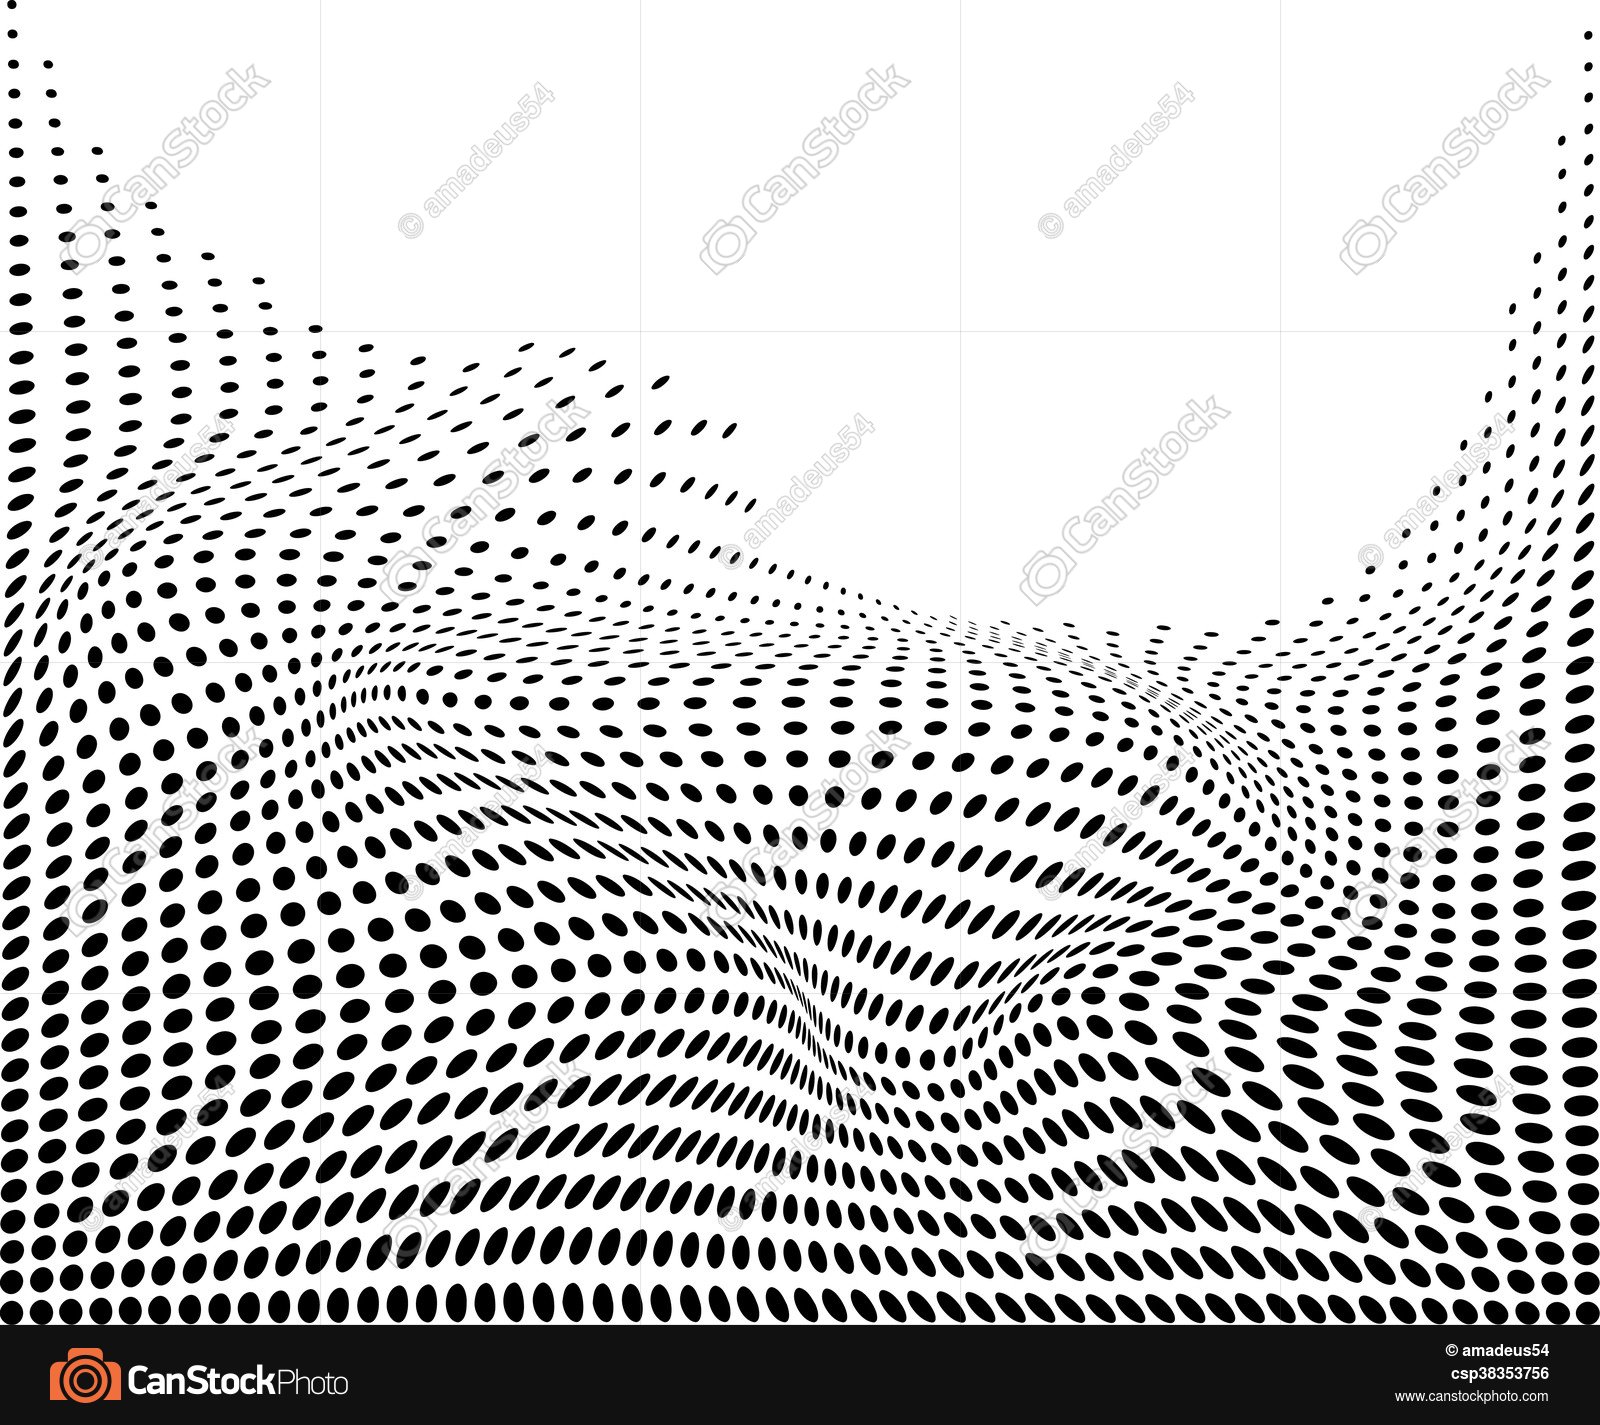 Halftone dots background pattern dotted black and white... clipart ...